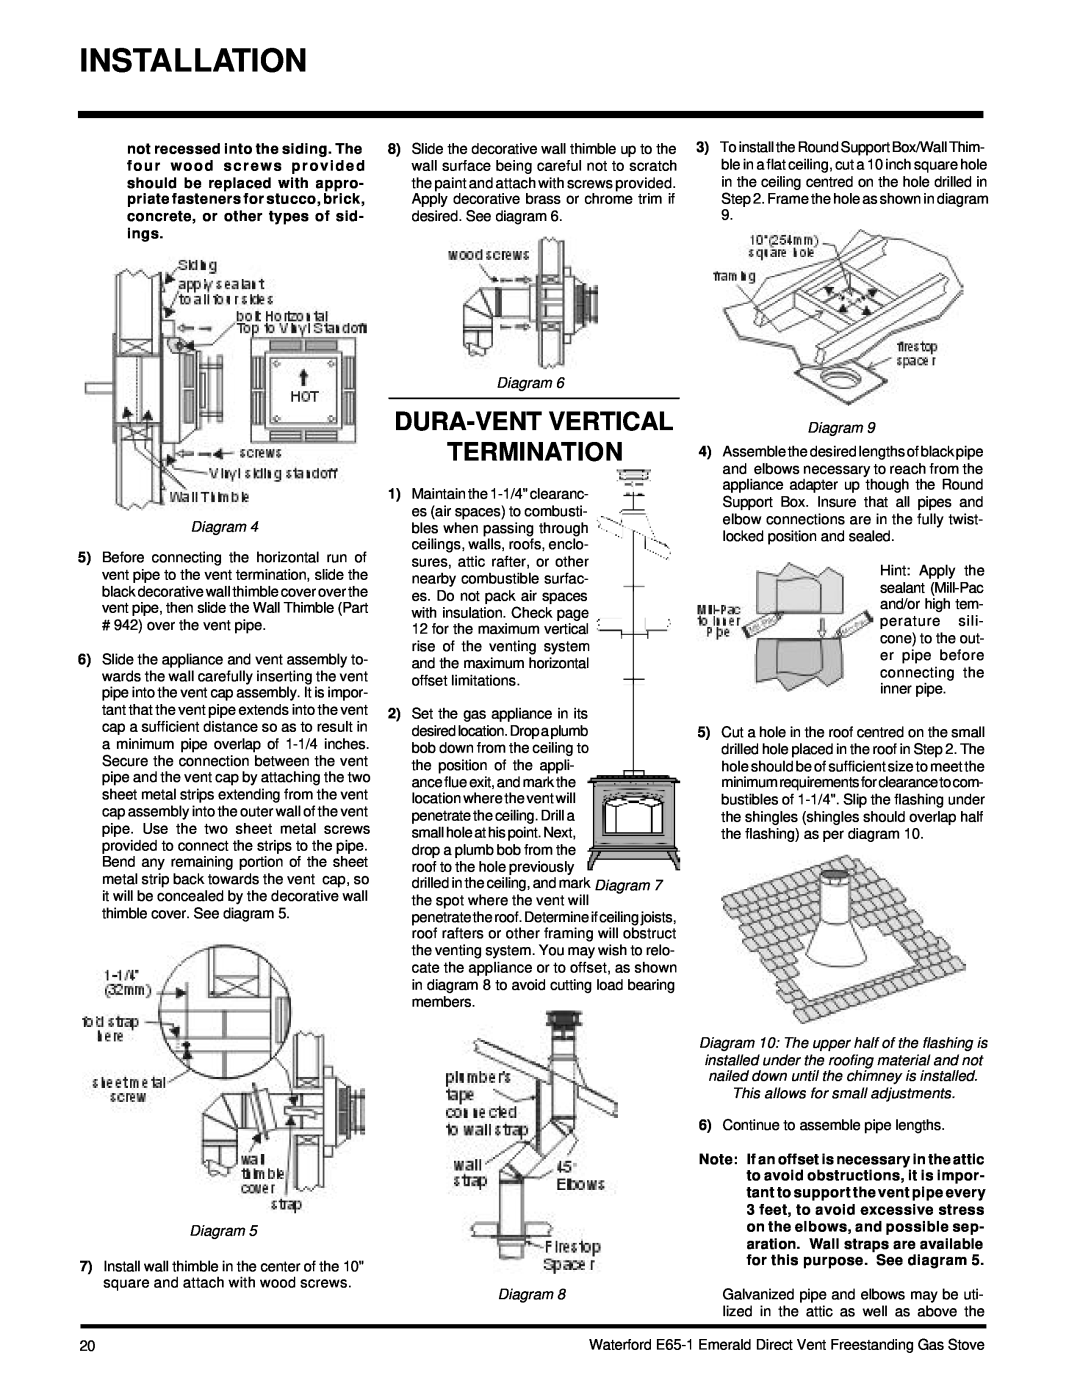 Waterford Appliances E65-NG1, E65-LP1 Dura-Ventvertical Termination, Diagram, This allows for small adjustments 